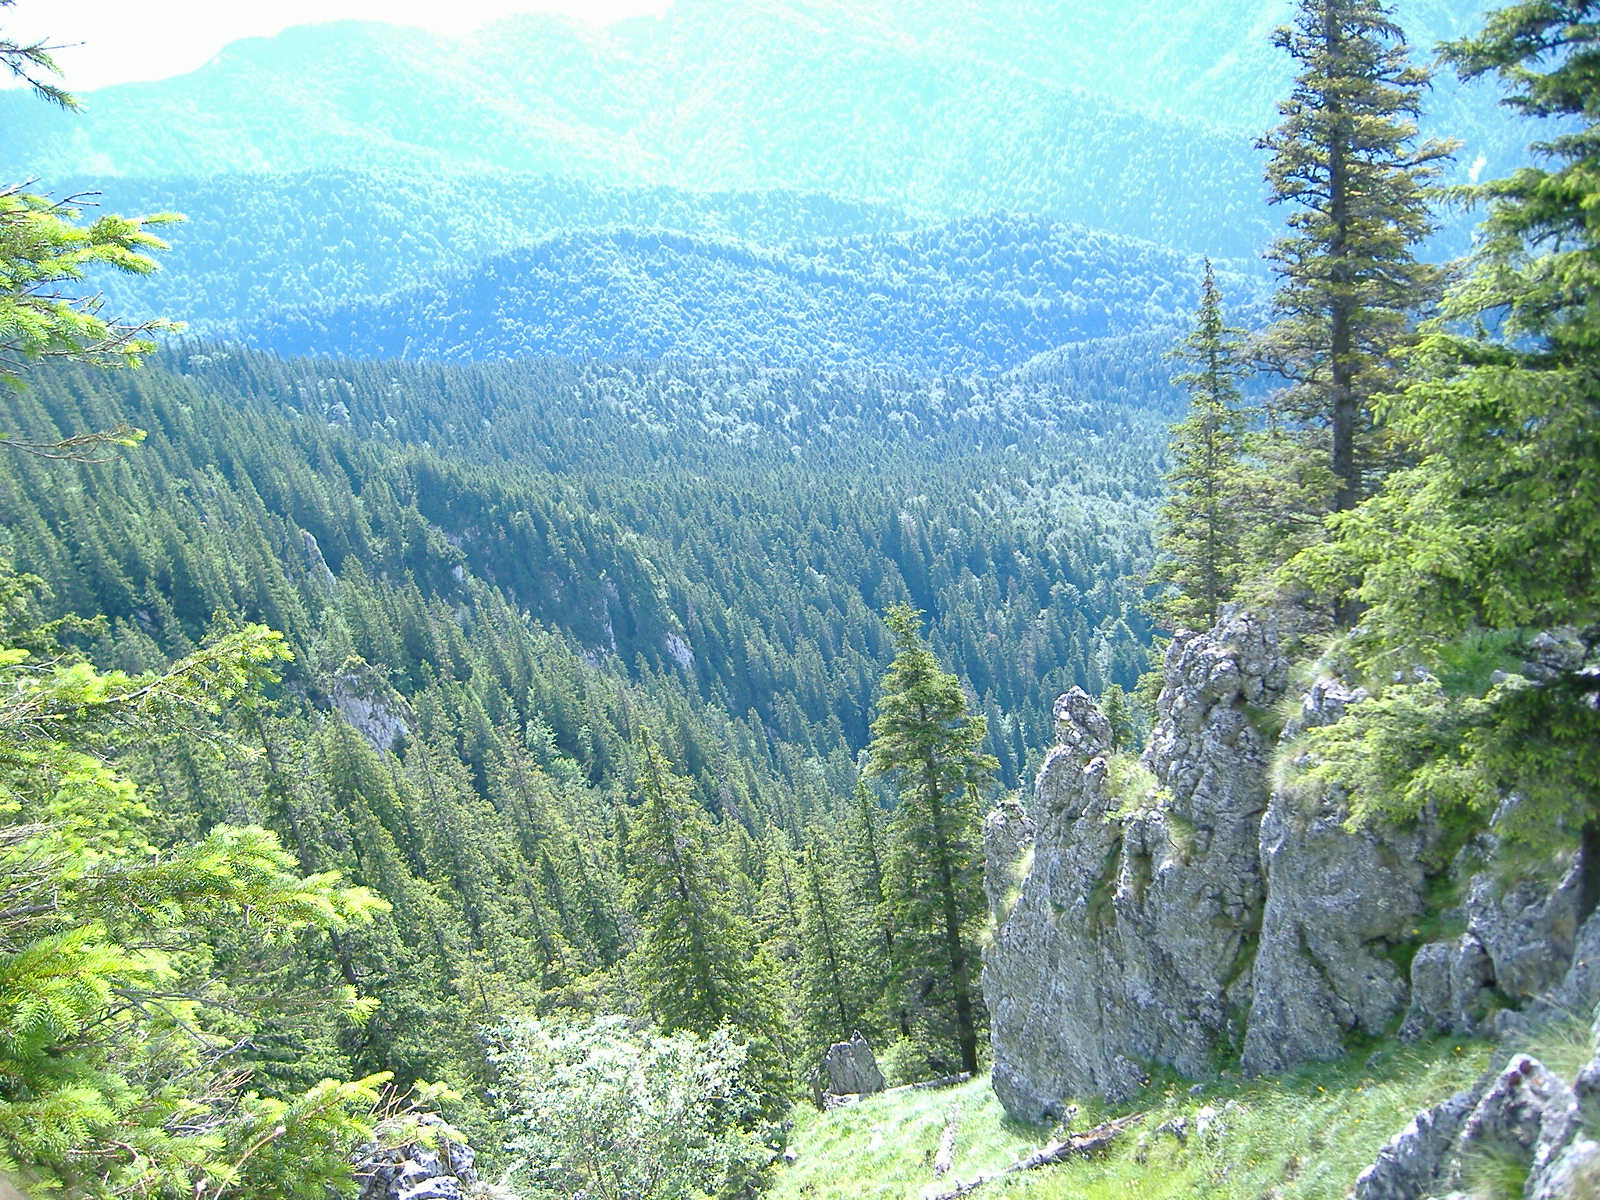 trees and rocks in the mountains overlooking the valley